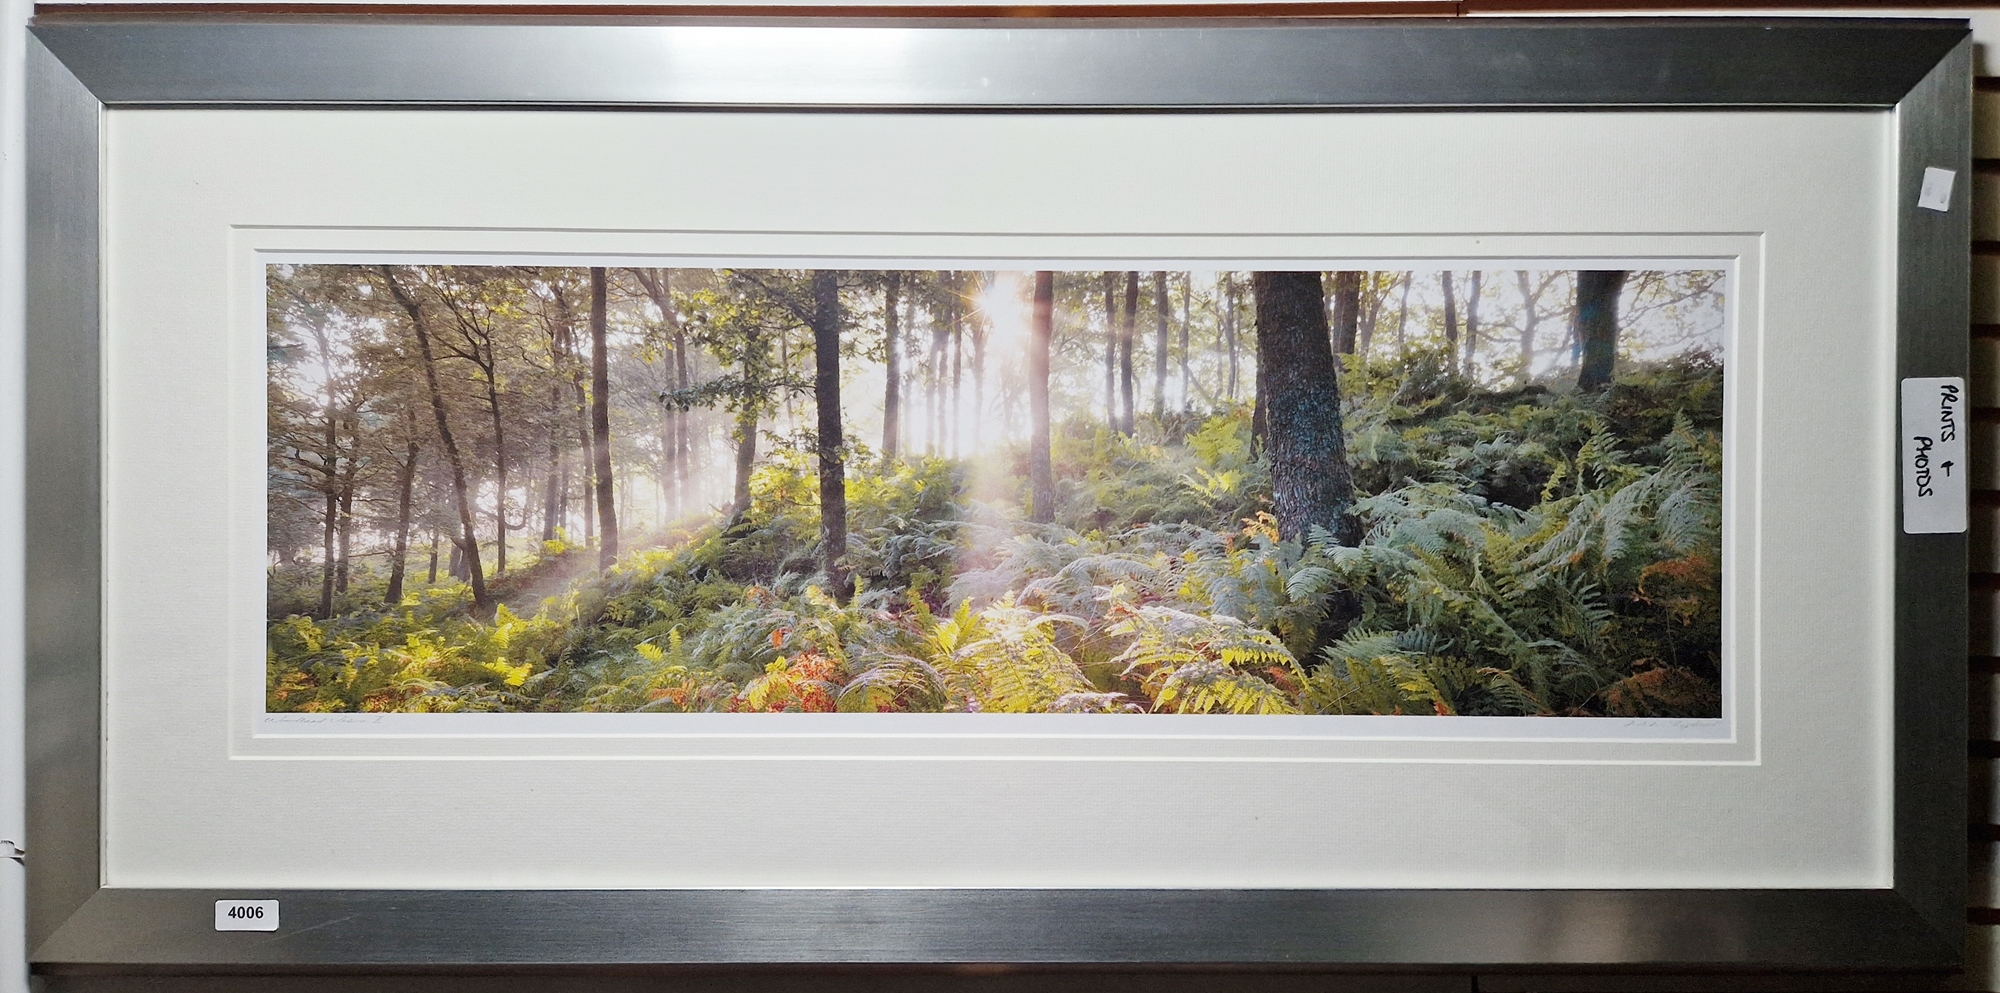 Mike Shepherd Photographic print 'Woodland Vision II', Artist's Proof, signed and titled in - Image 2 of 4